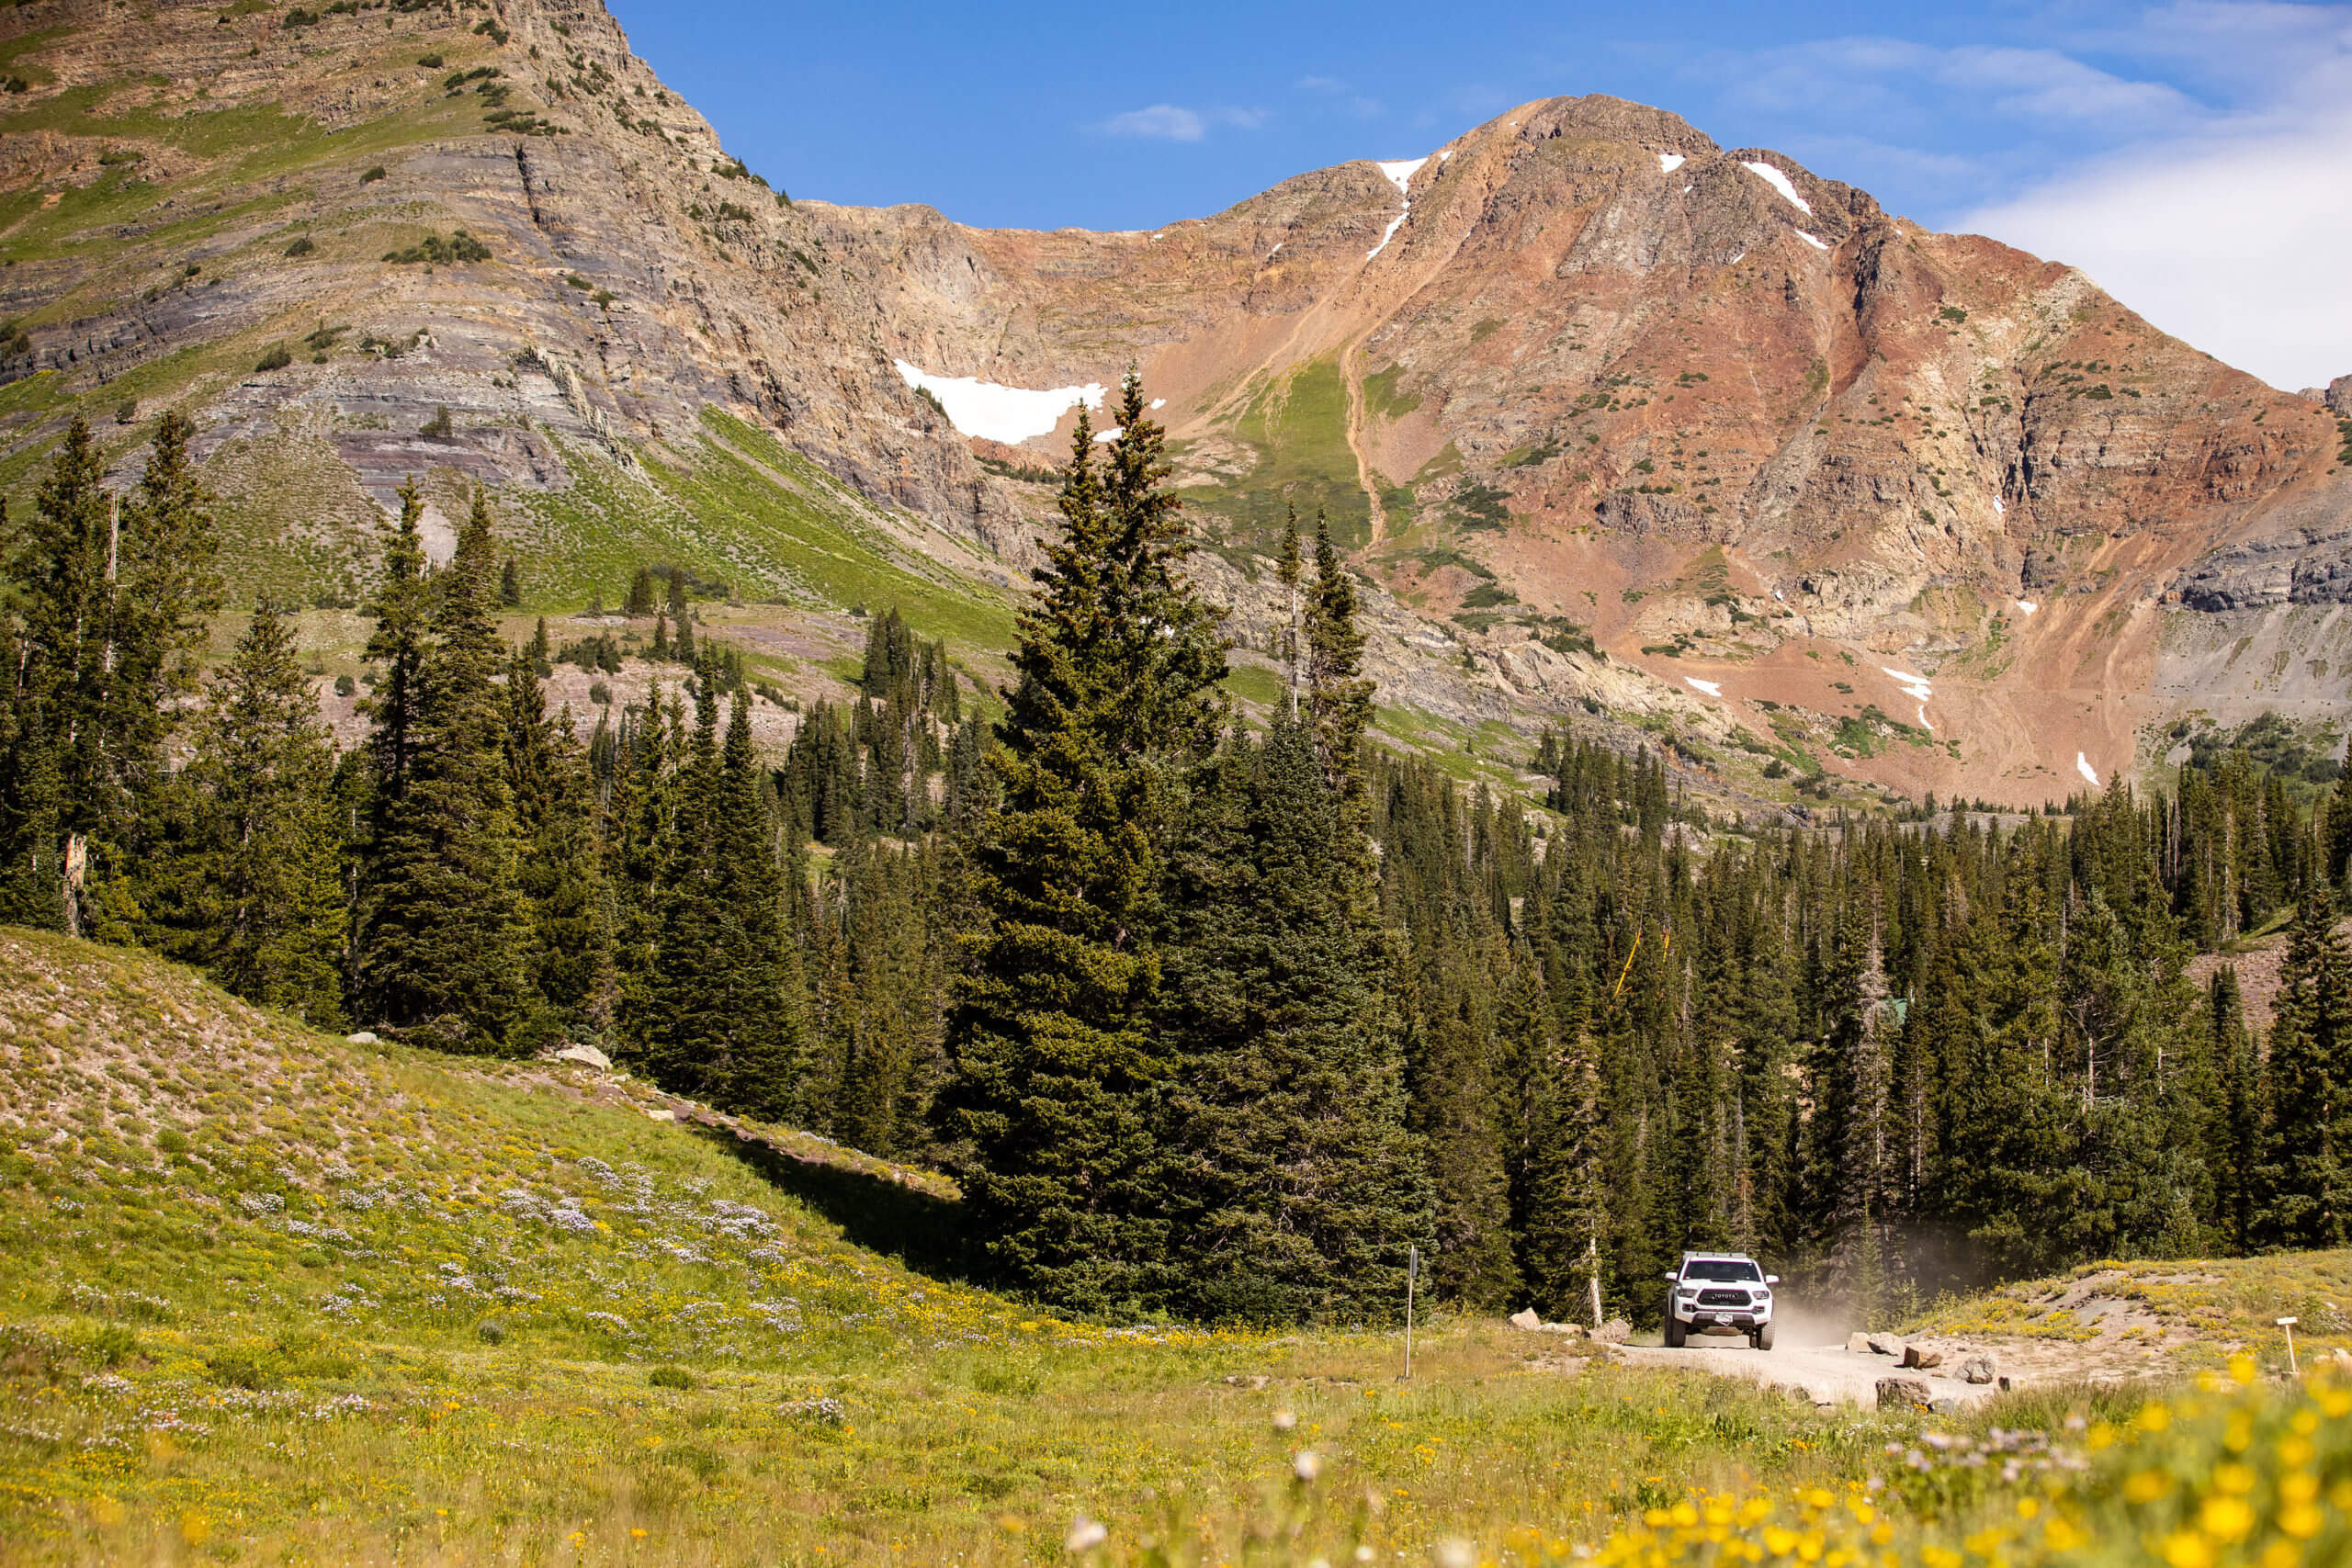 Image of a Colorado Overlander vehicle driving in front of dramatic mountains